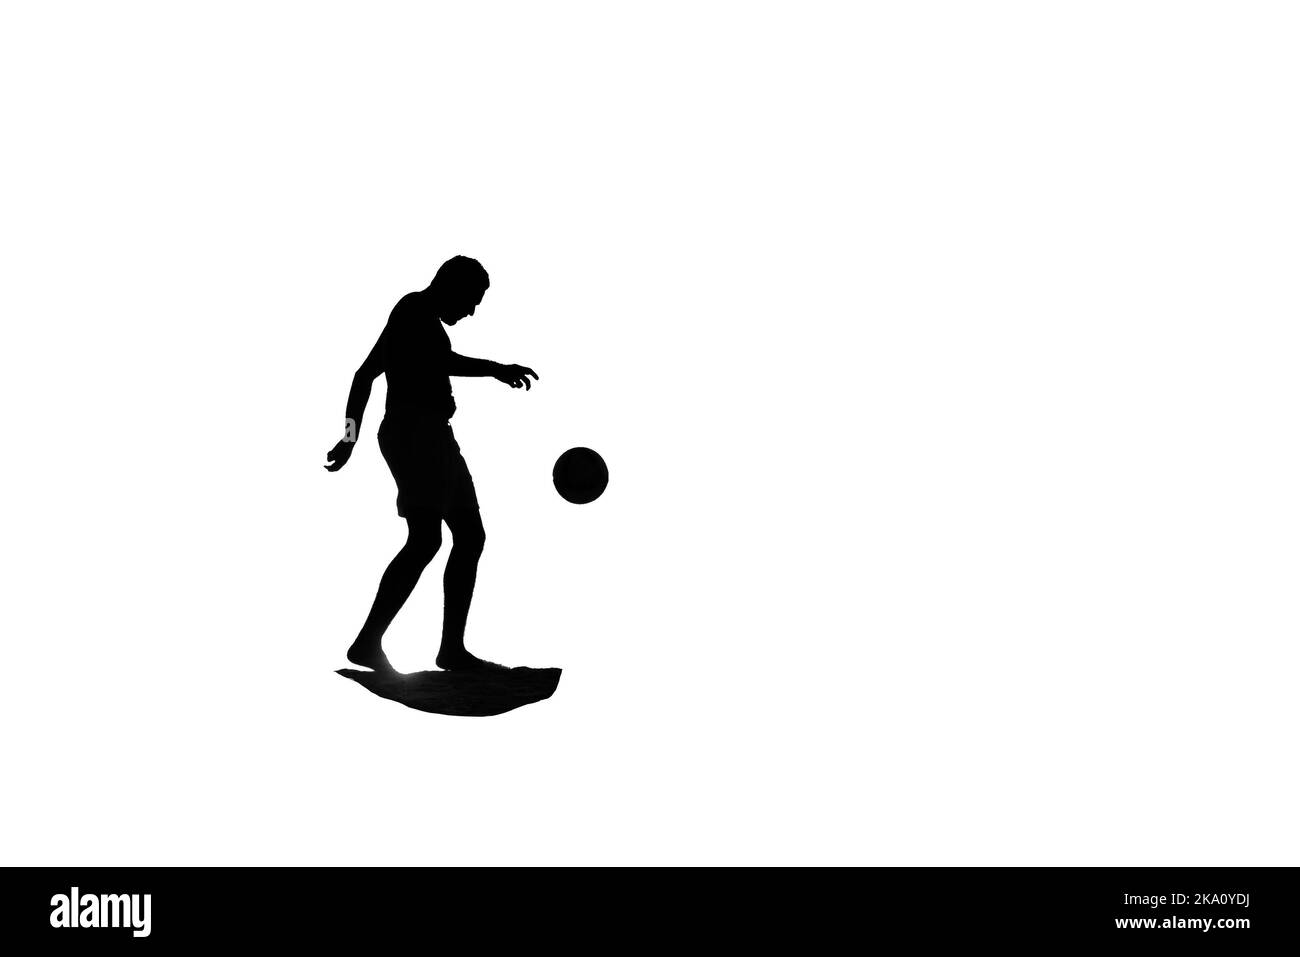 Silhouette of a man playing football Stock Photo